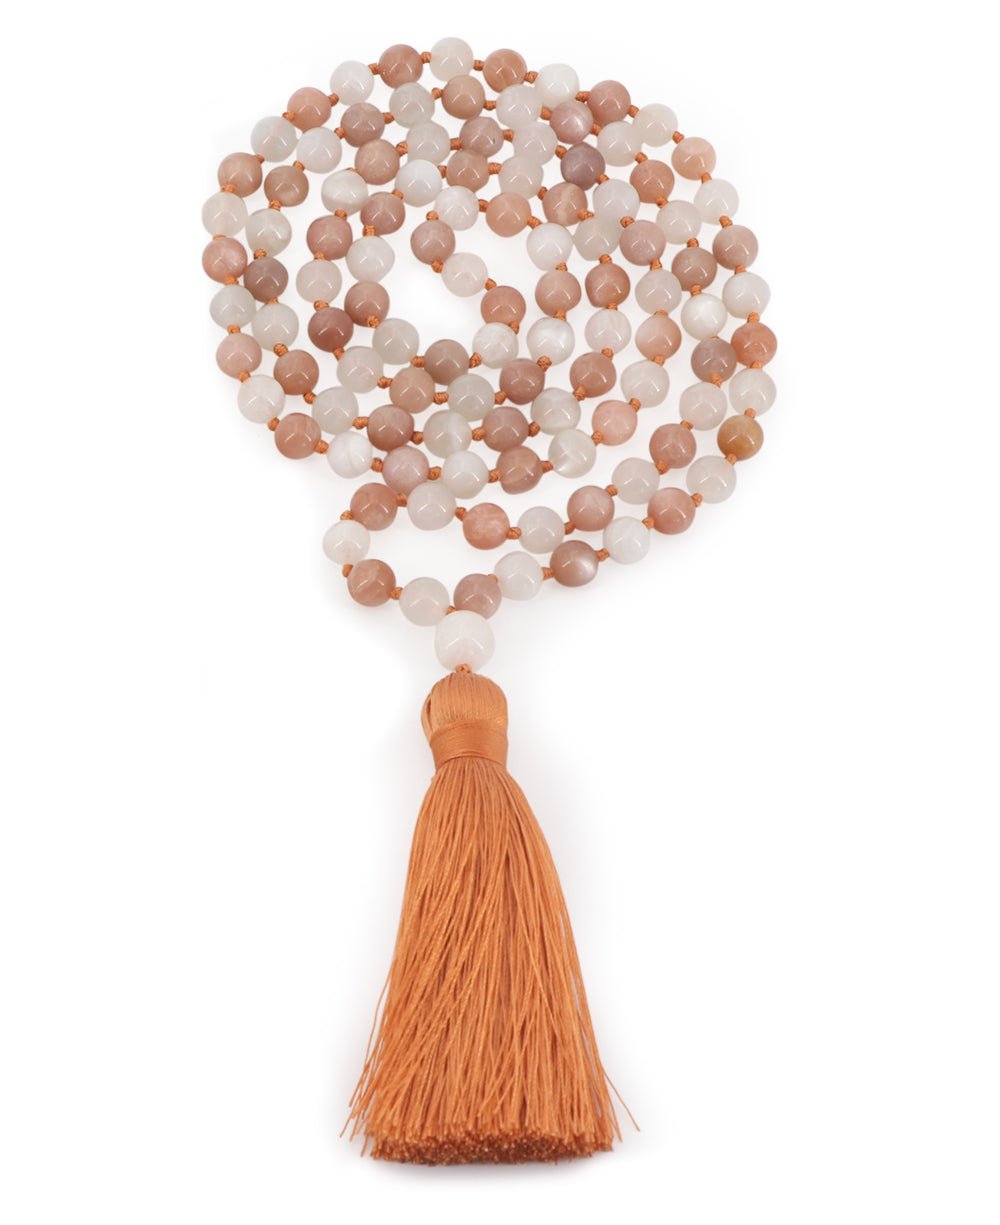 Ethereal White and Peach Moonstone Beads Meditation Knotted Mala - Prayer Beads 6mm